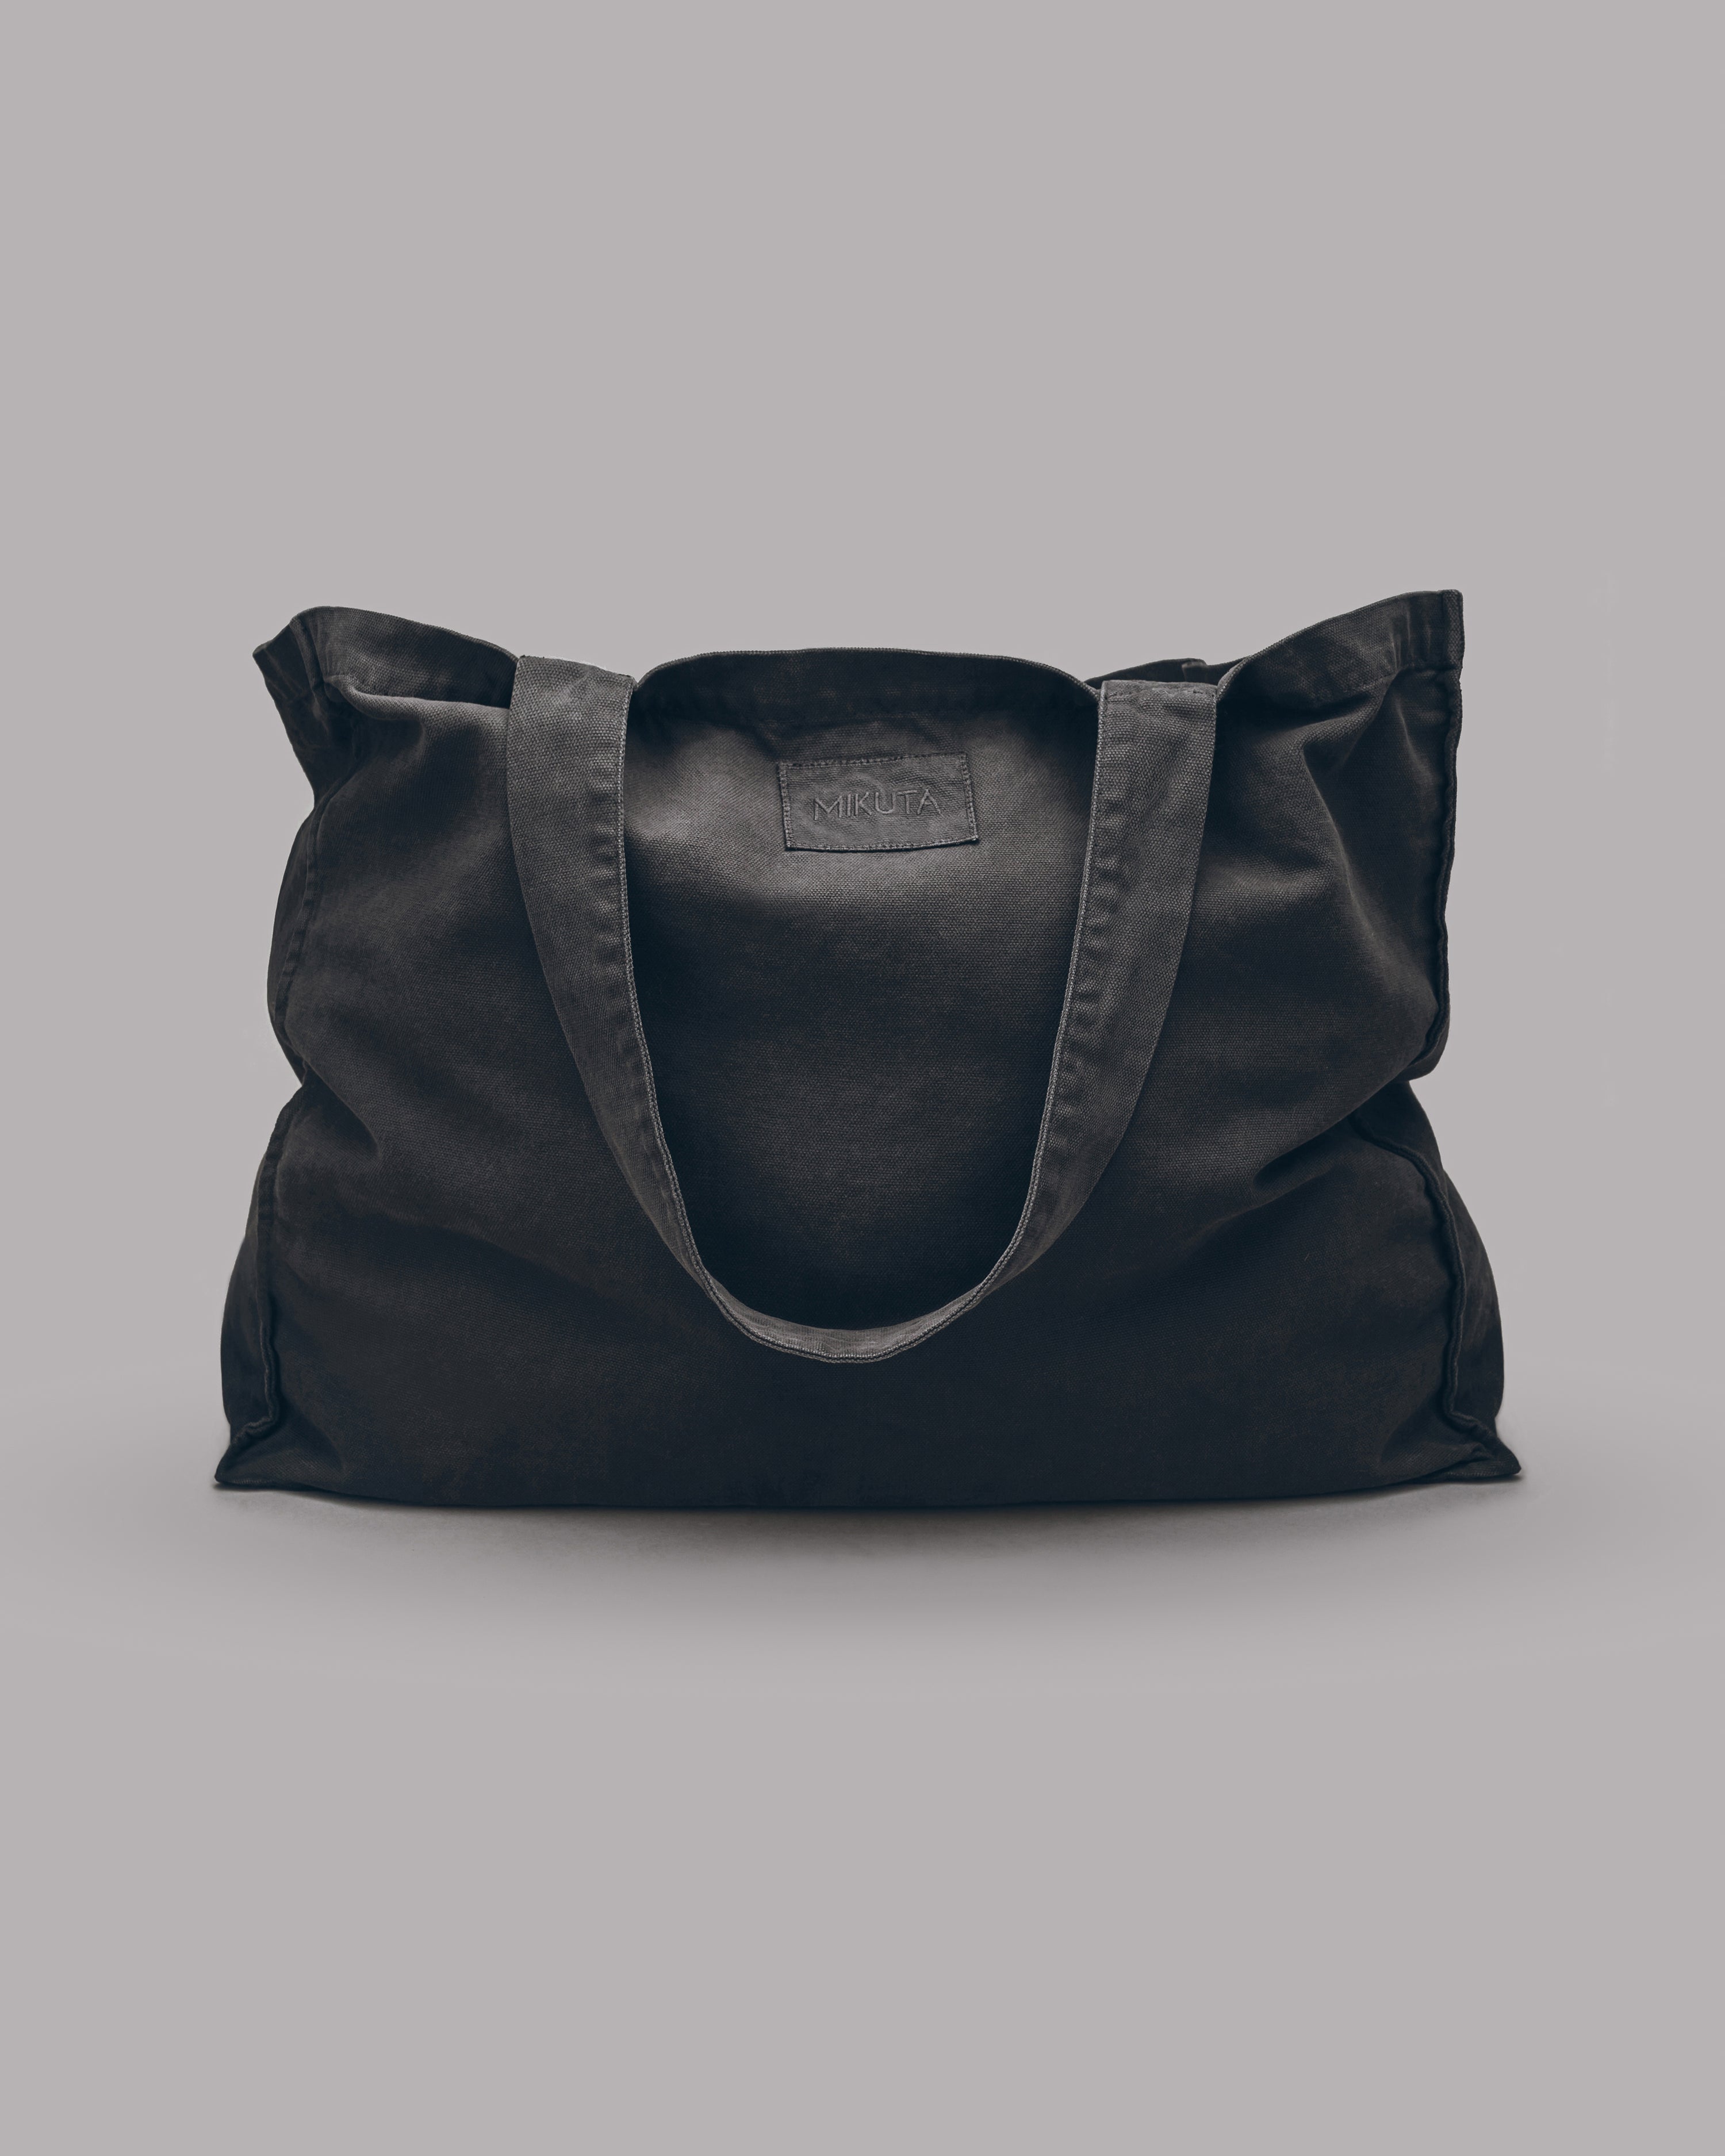 The Charcoal Large Canvas Bag